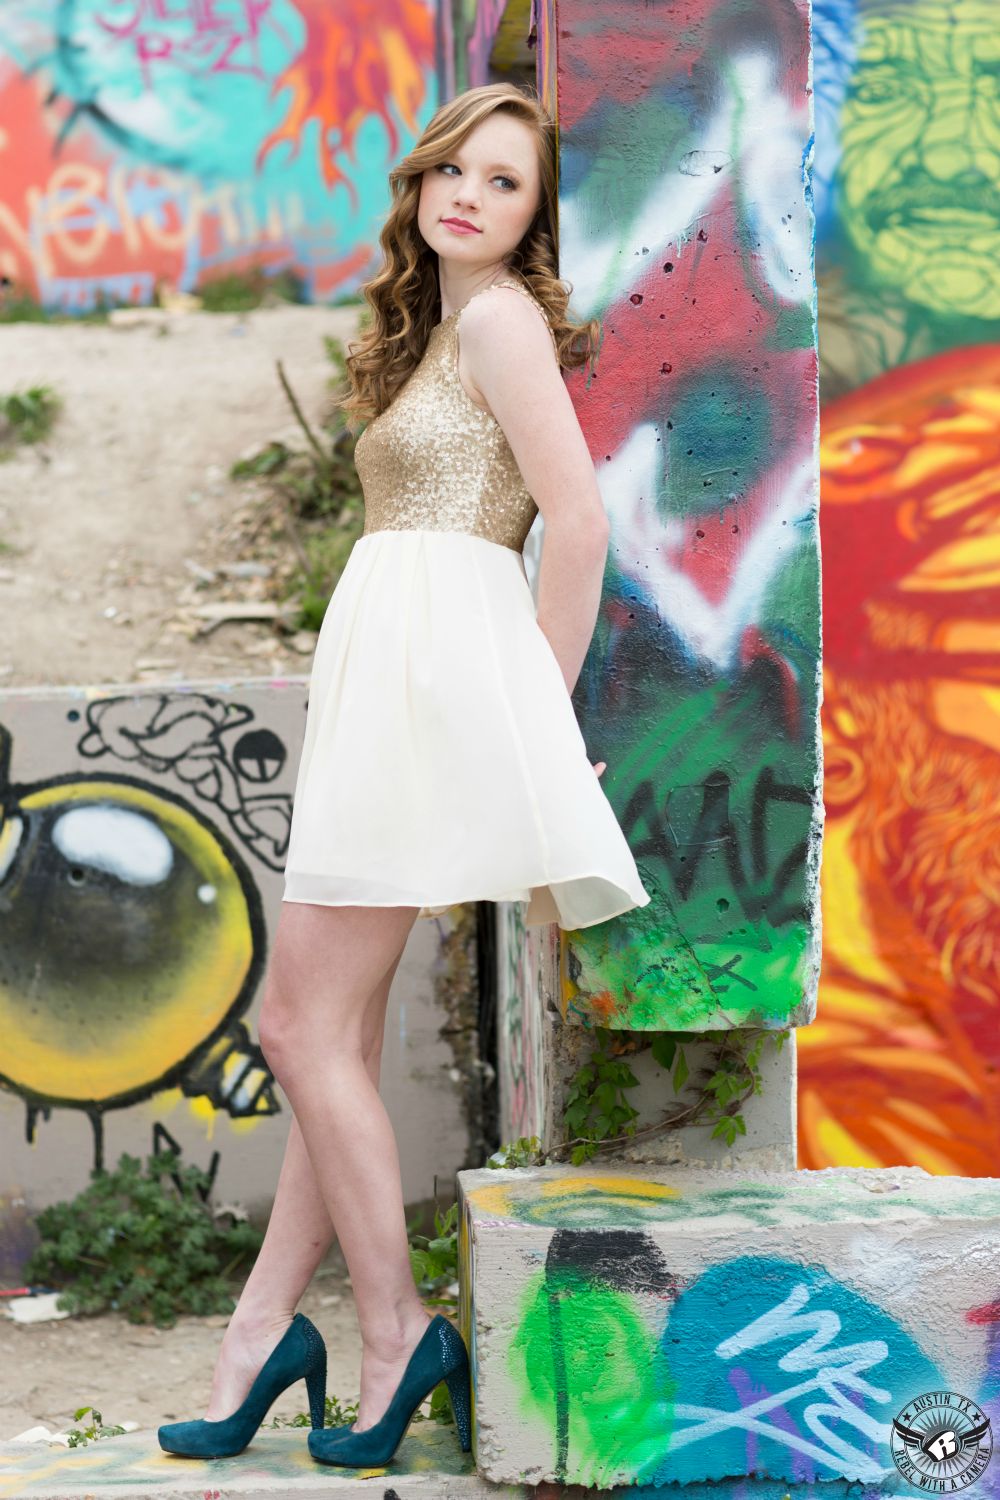 Stunning senior portrait photography of blonde girl in fancy dress with hair and makeup by Divaz Fabula at the Castle Hill Graffiti wall in Austin, Texas.